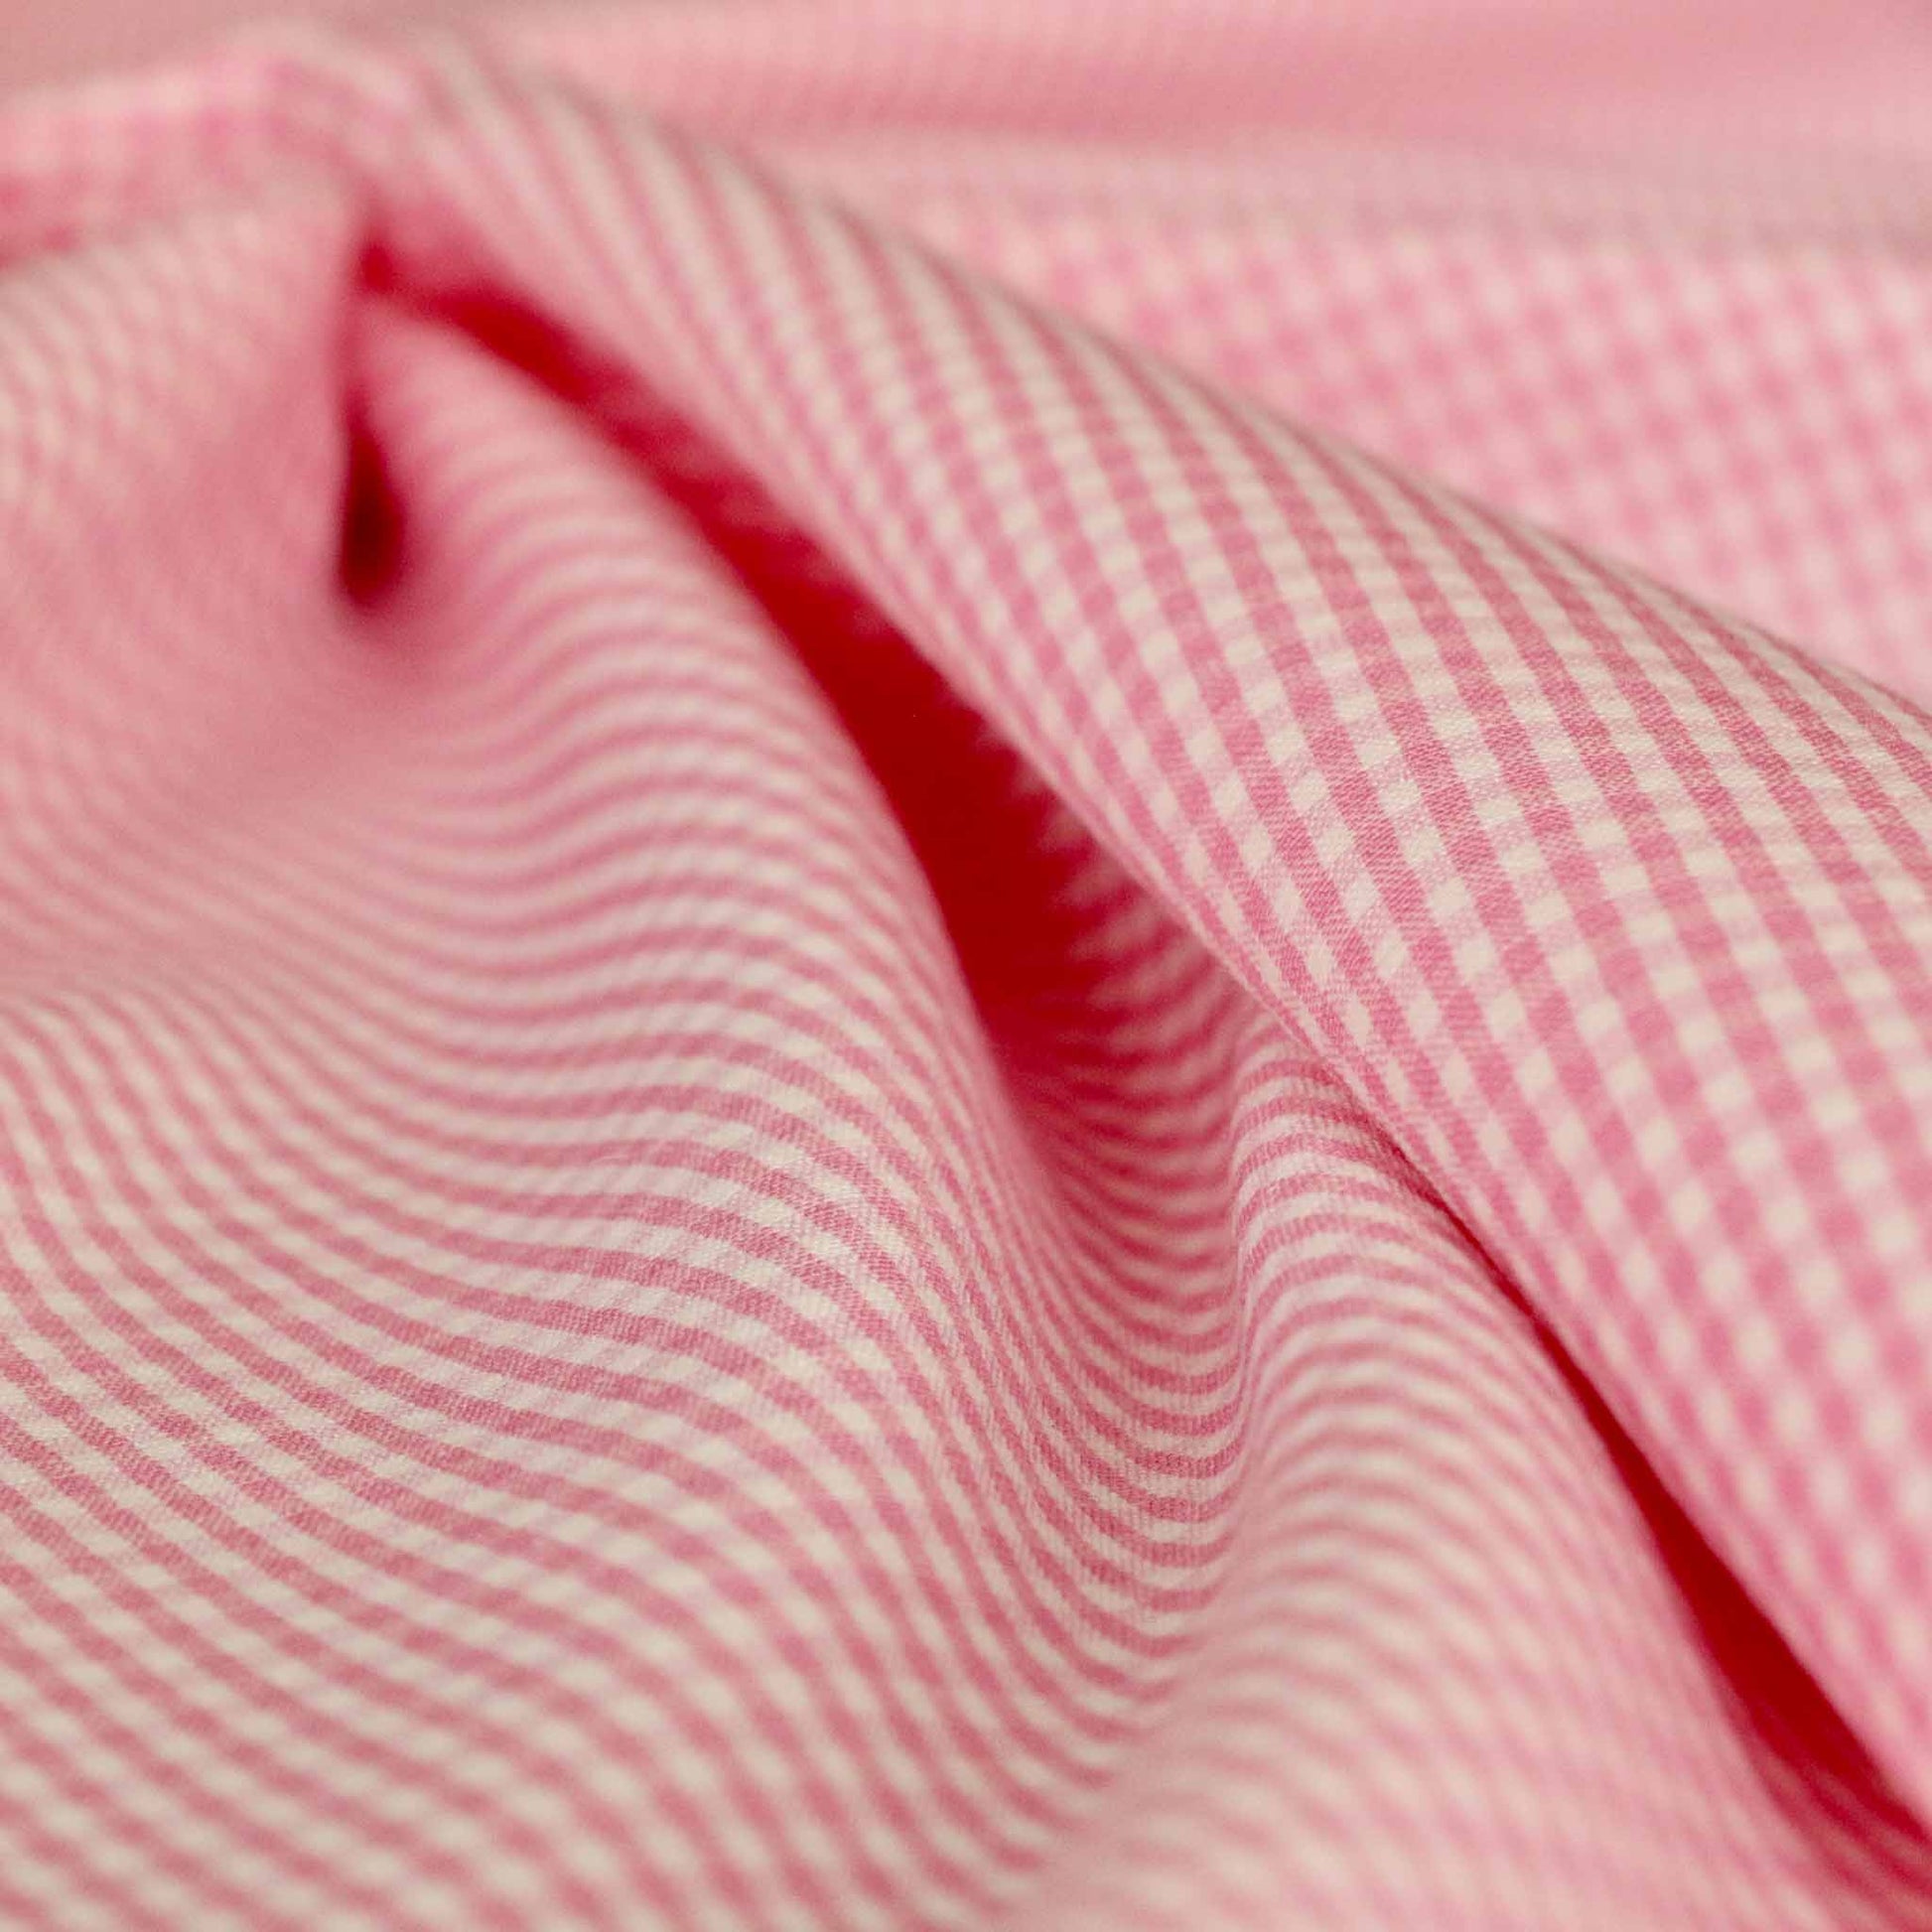 gingham check patterned bengaline dressmaking suiting fabric in pink and white